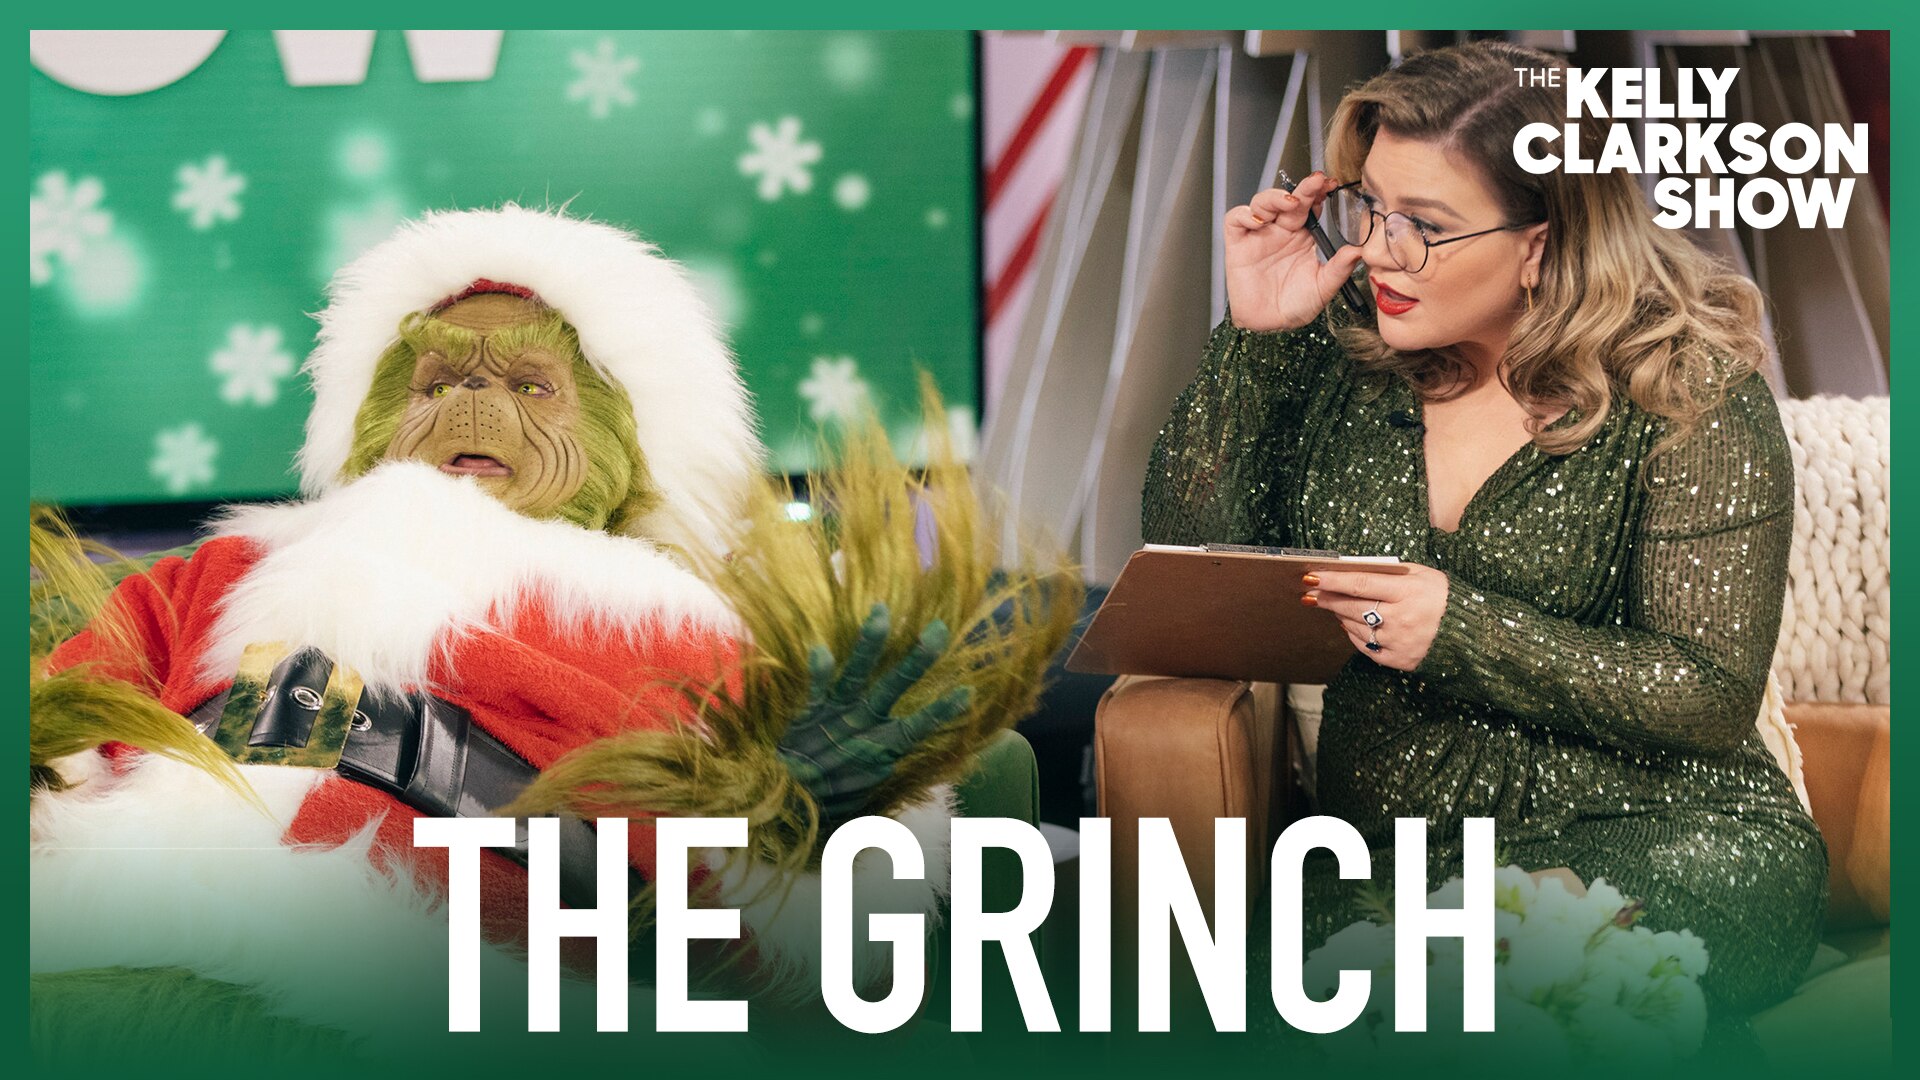 Watch The Kelly Clarkson Show Official Website Highlight The Grinch Gets Hilarious Therapy